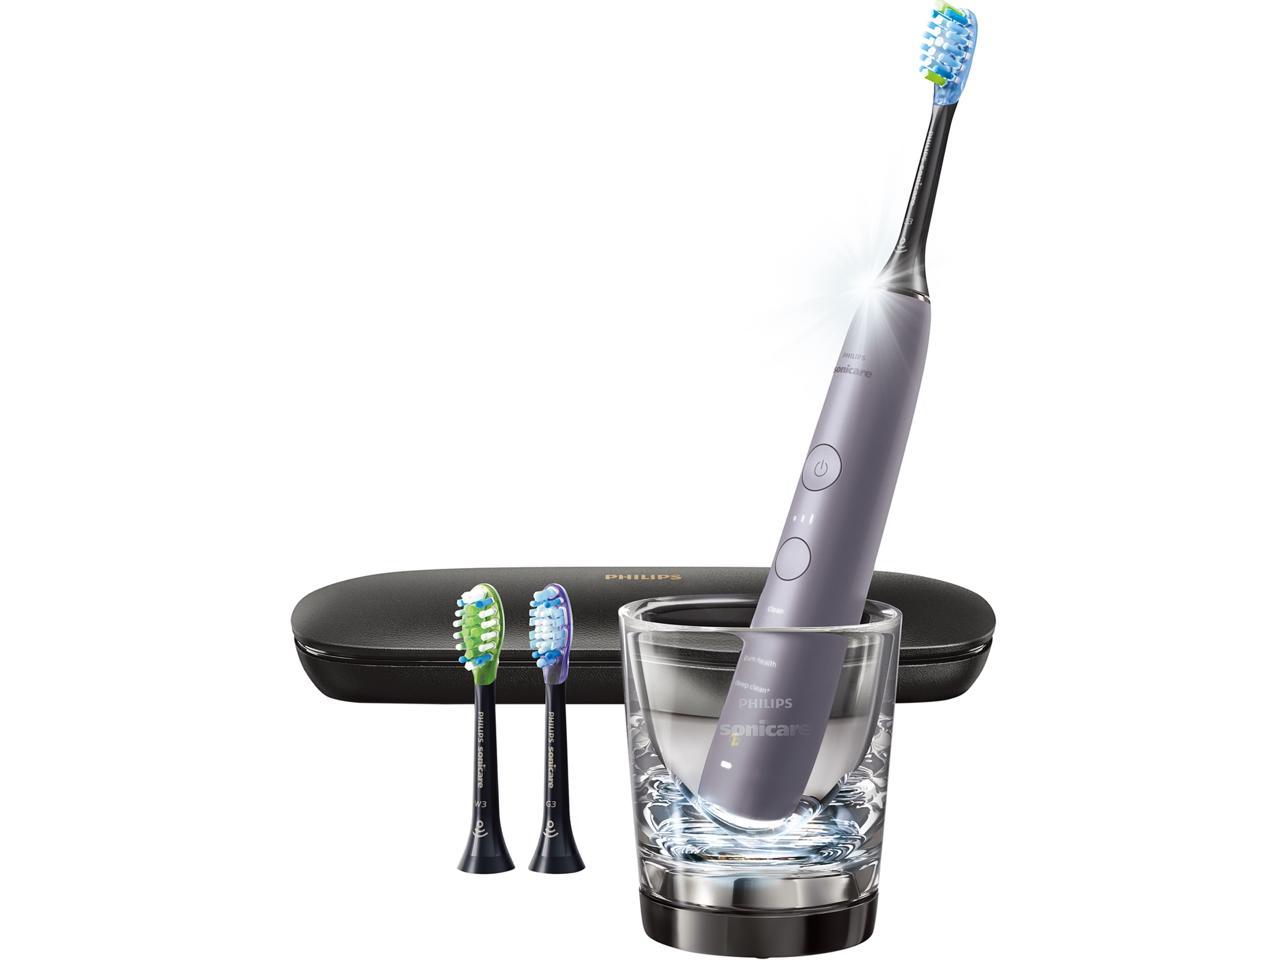 Sonicare Philips Sonicare DiamondClean Smart 9300 Rechargeable Electric Power Toothbrush, Grey (HX9903/41)